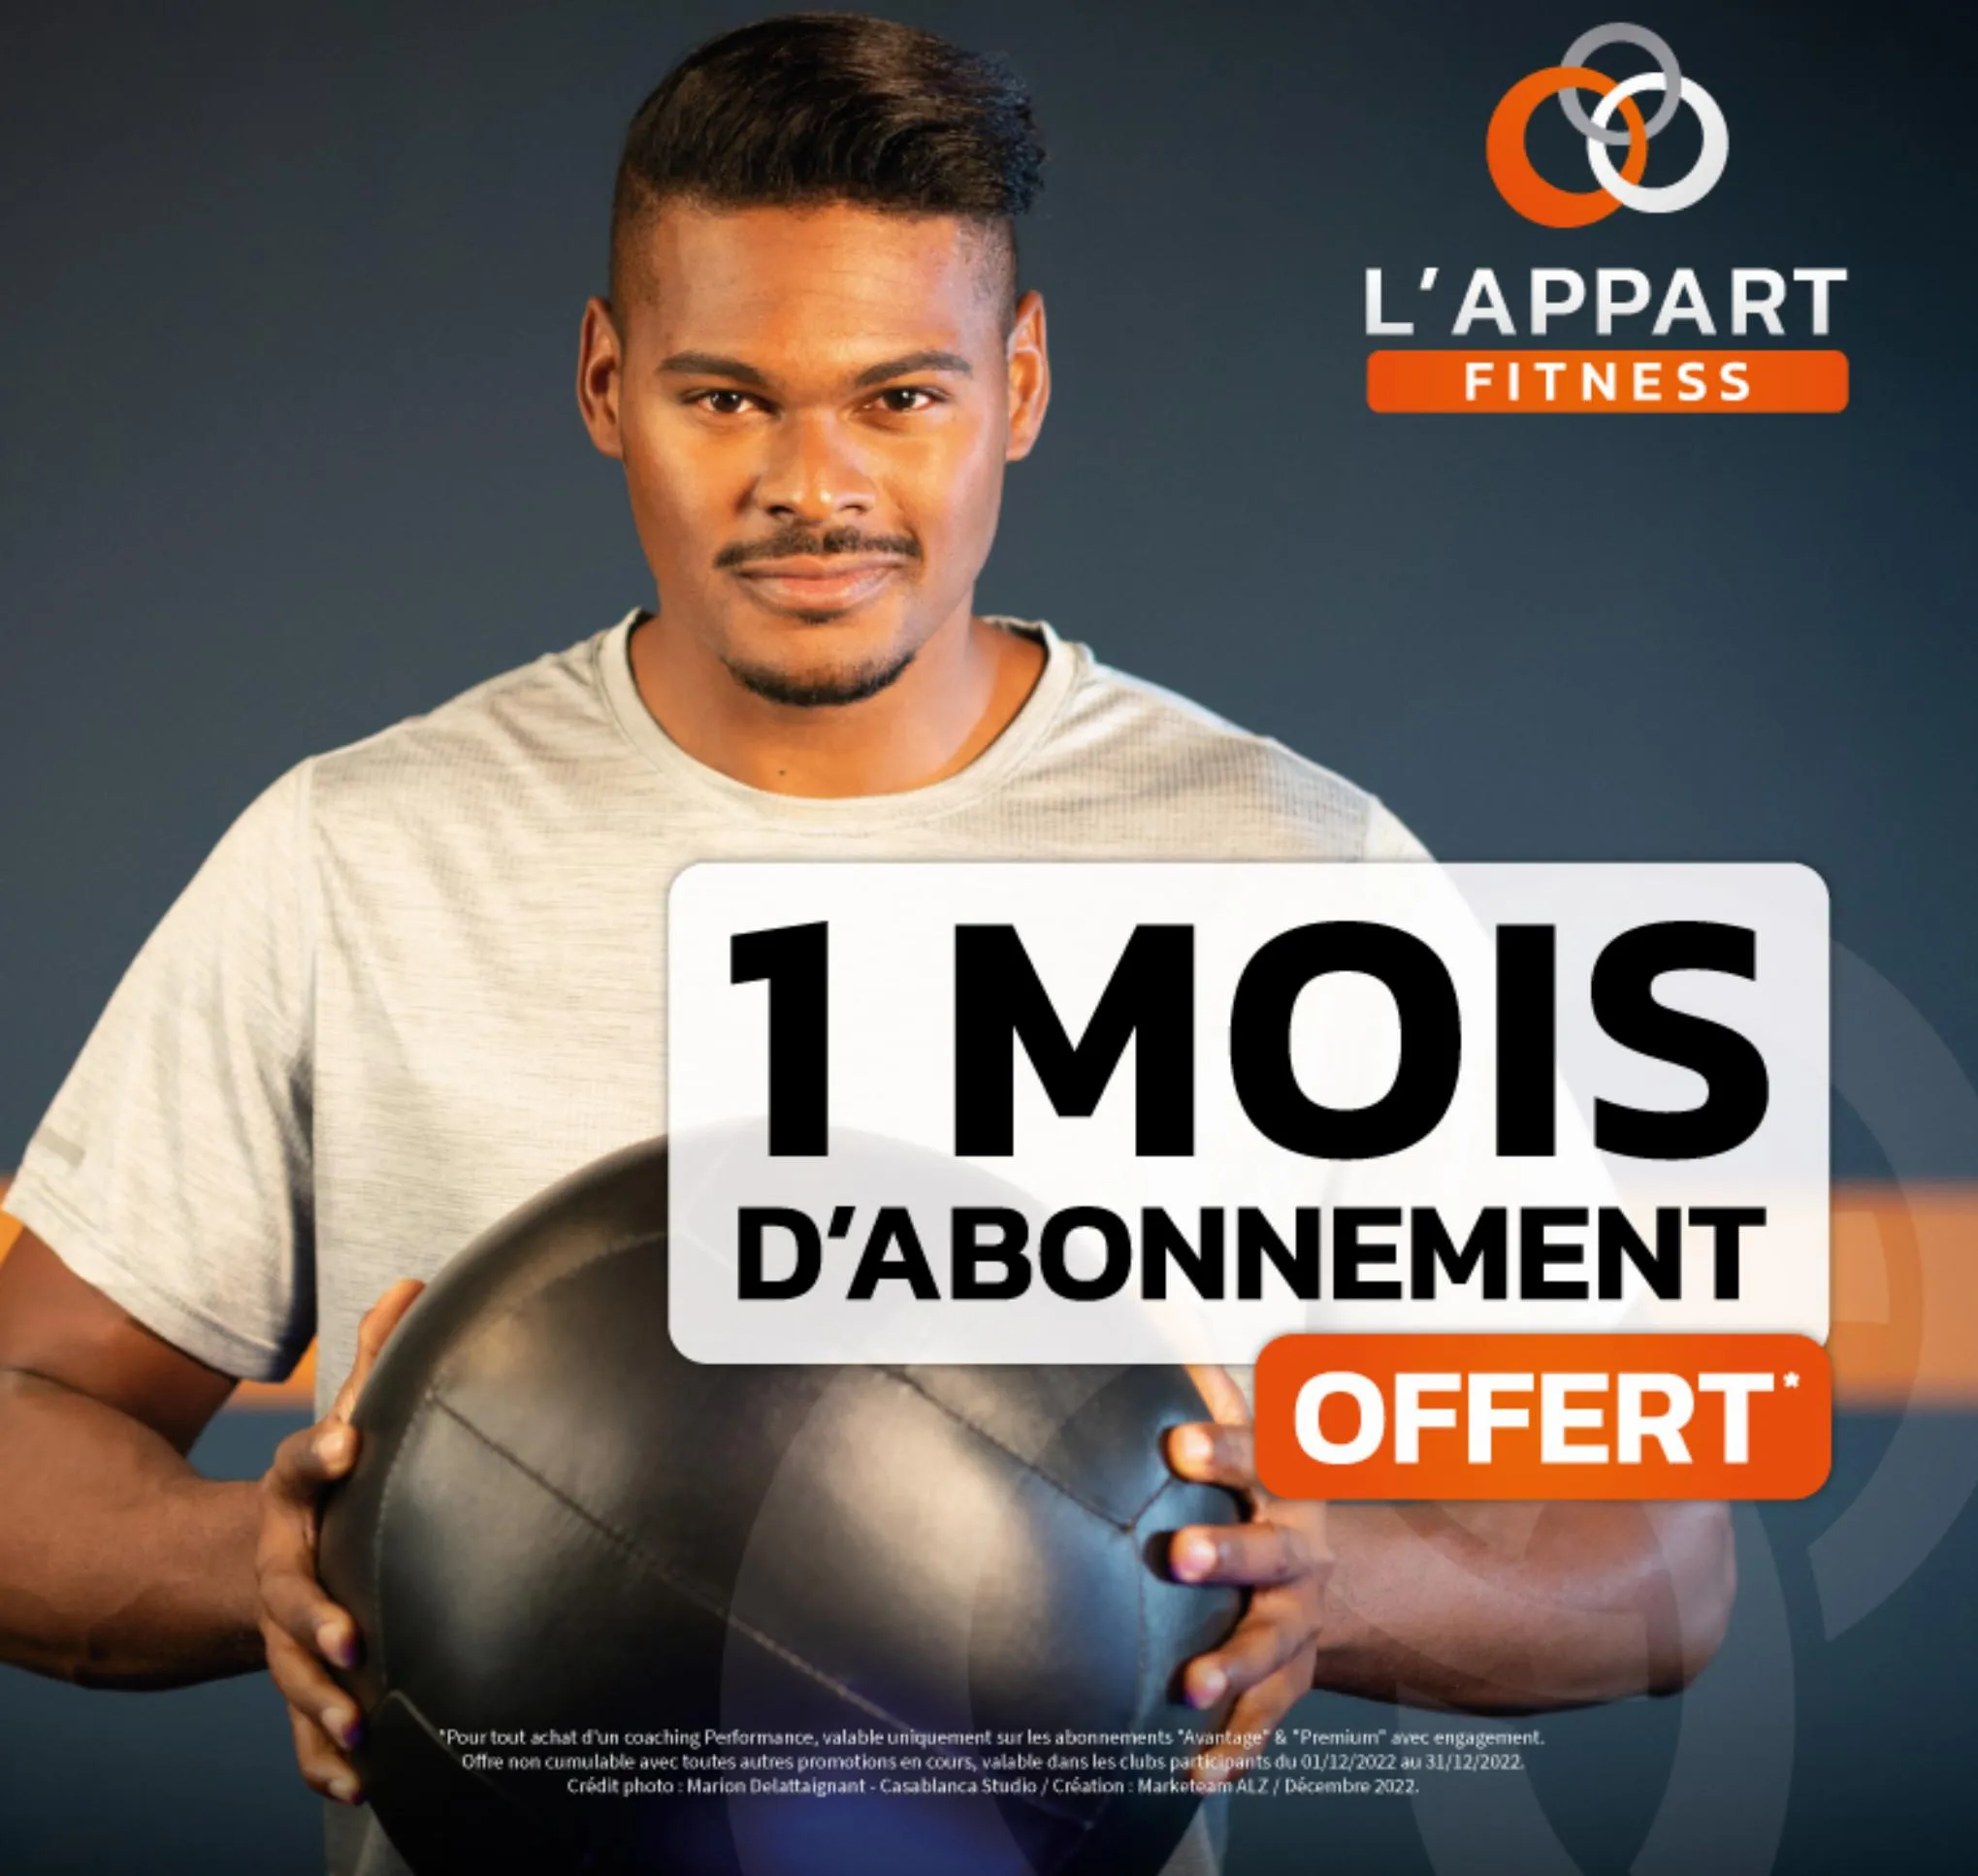 Catalogue L'appart fitness Offers, page 00001